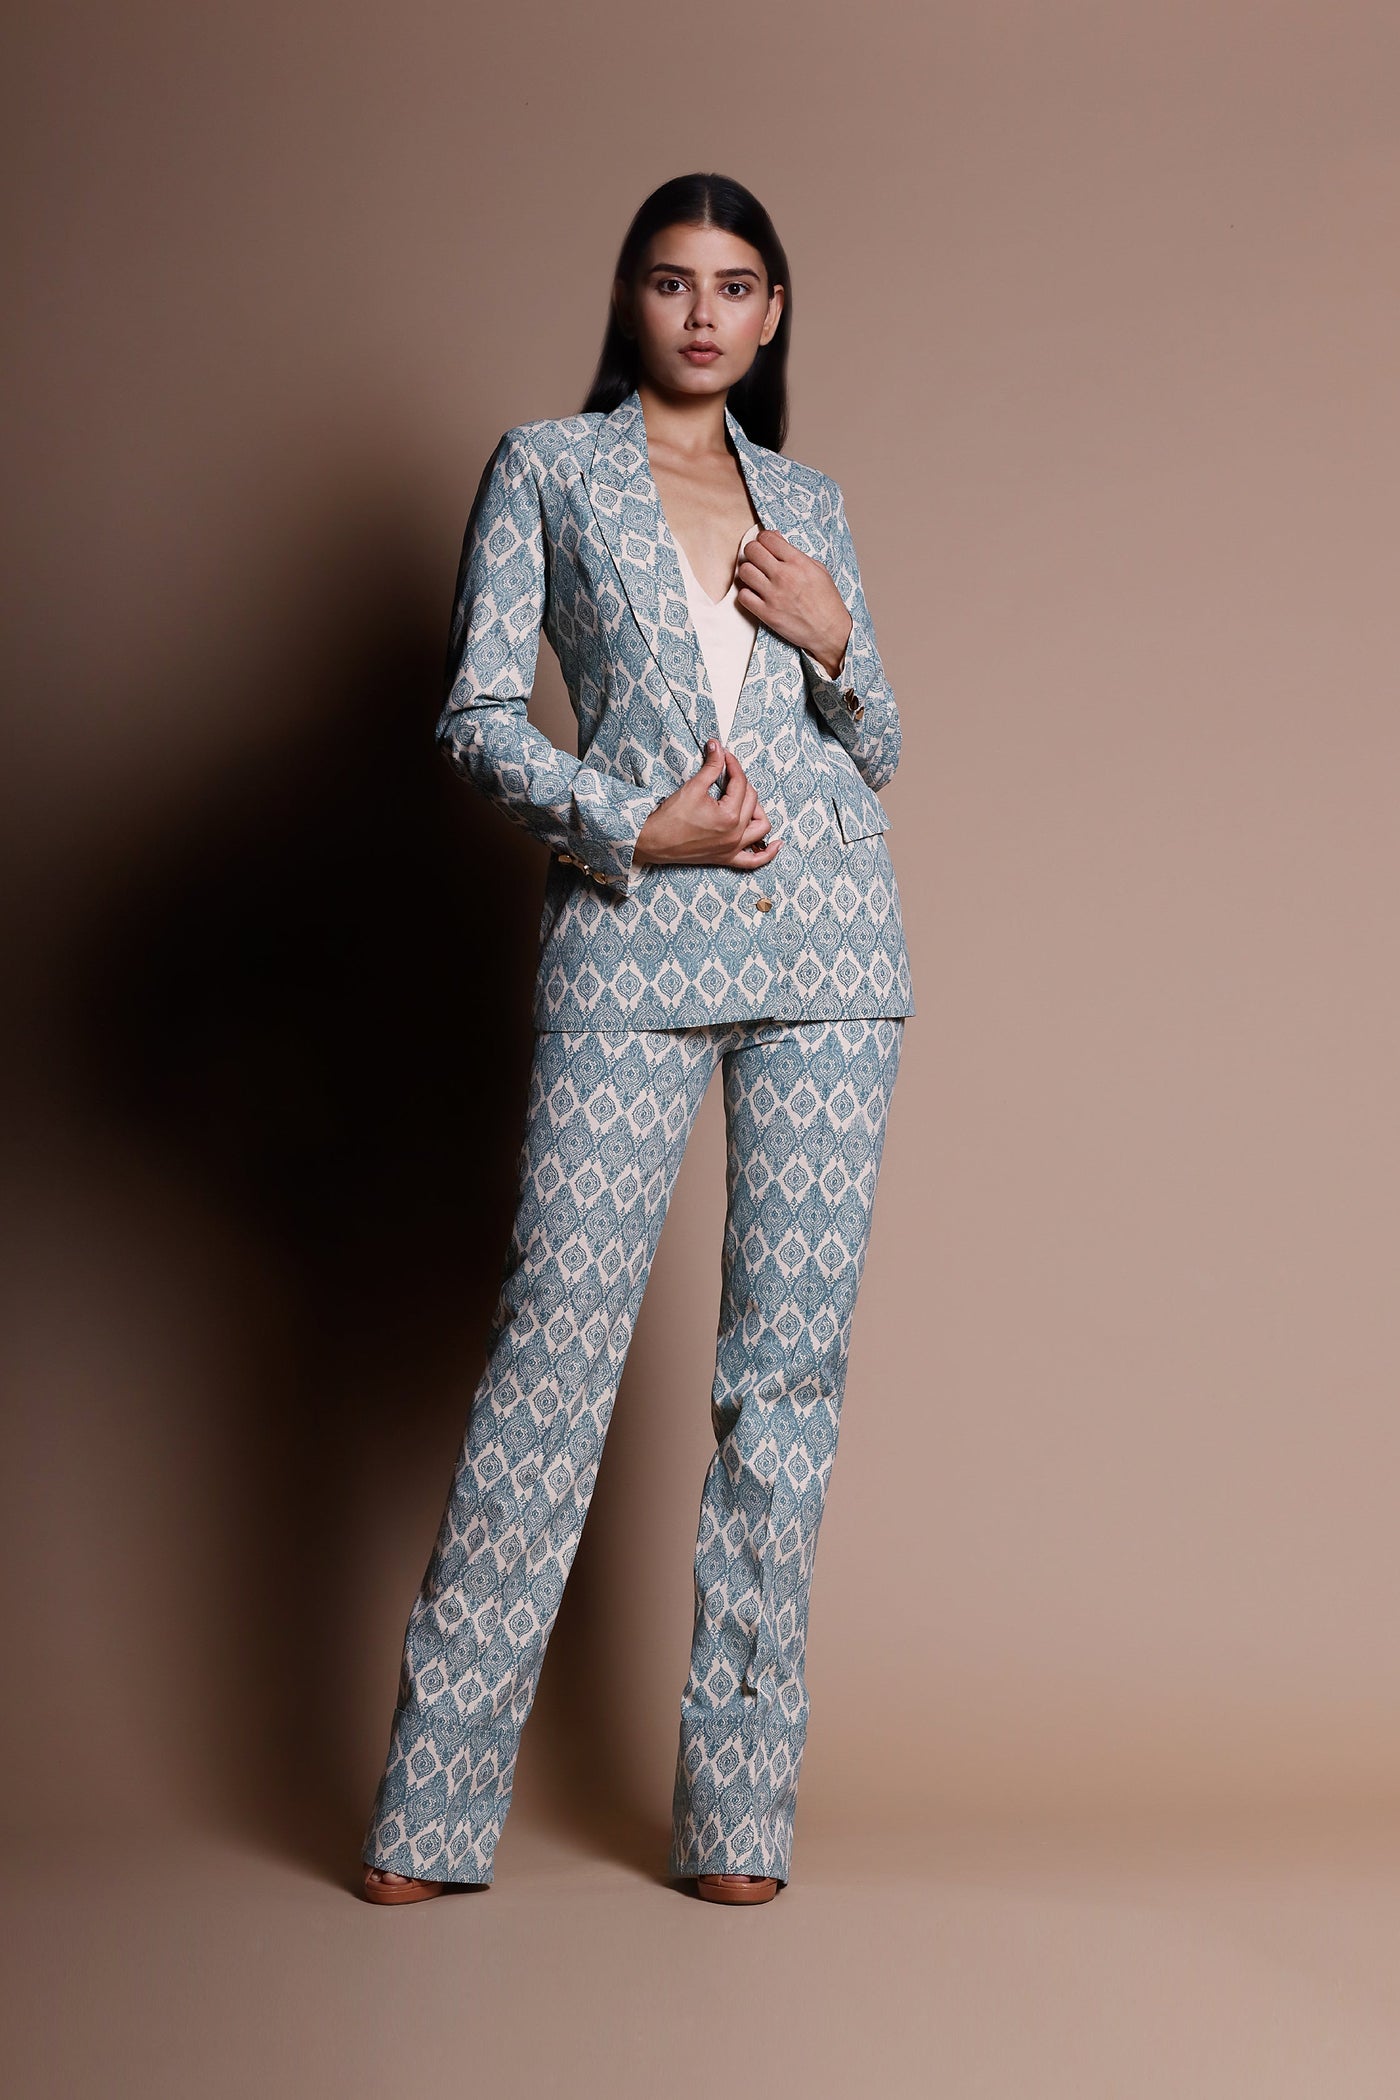 A Printed Jacket & Trouser Set With A Georgette Camisole - BHUMIKA SHARMA